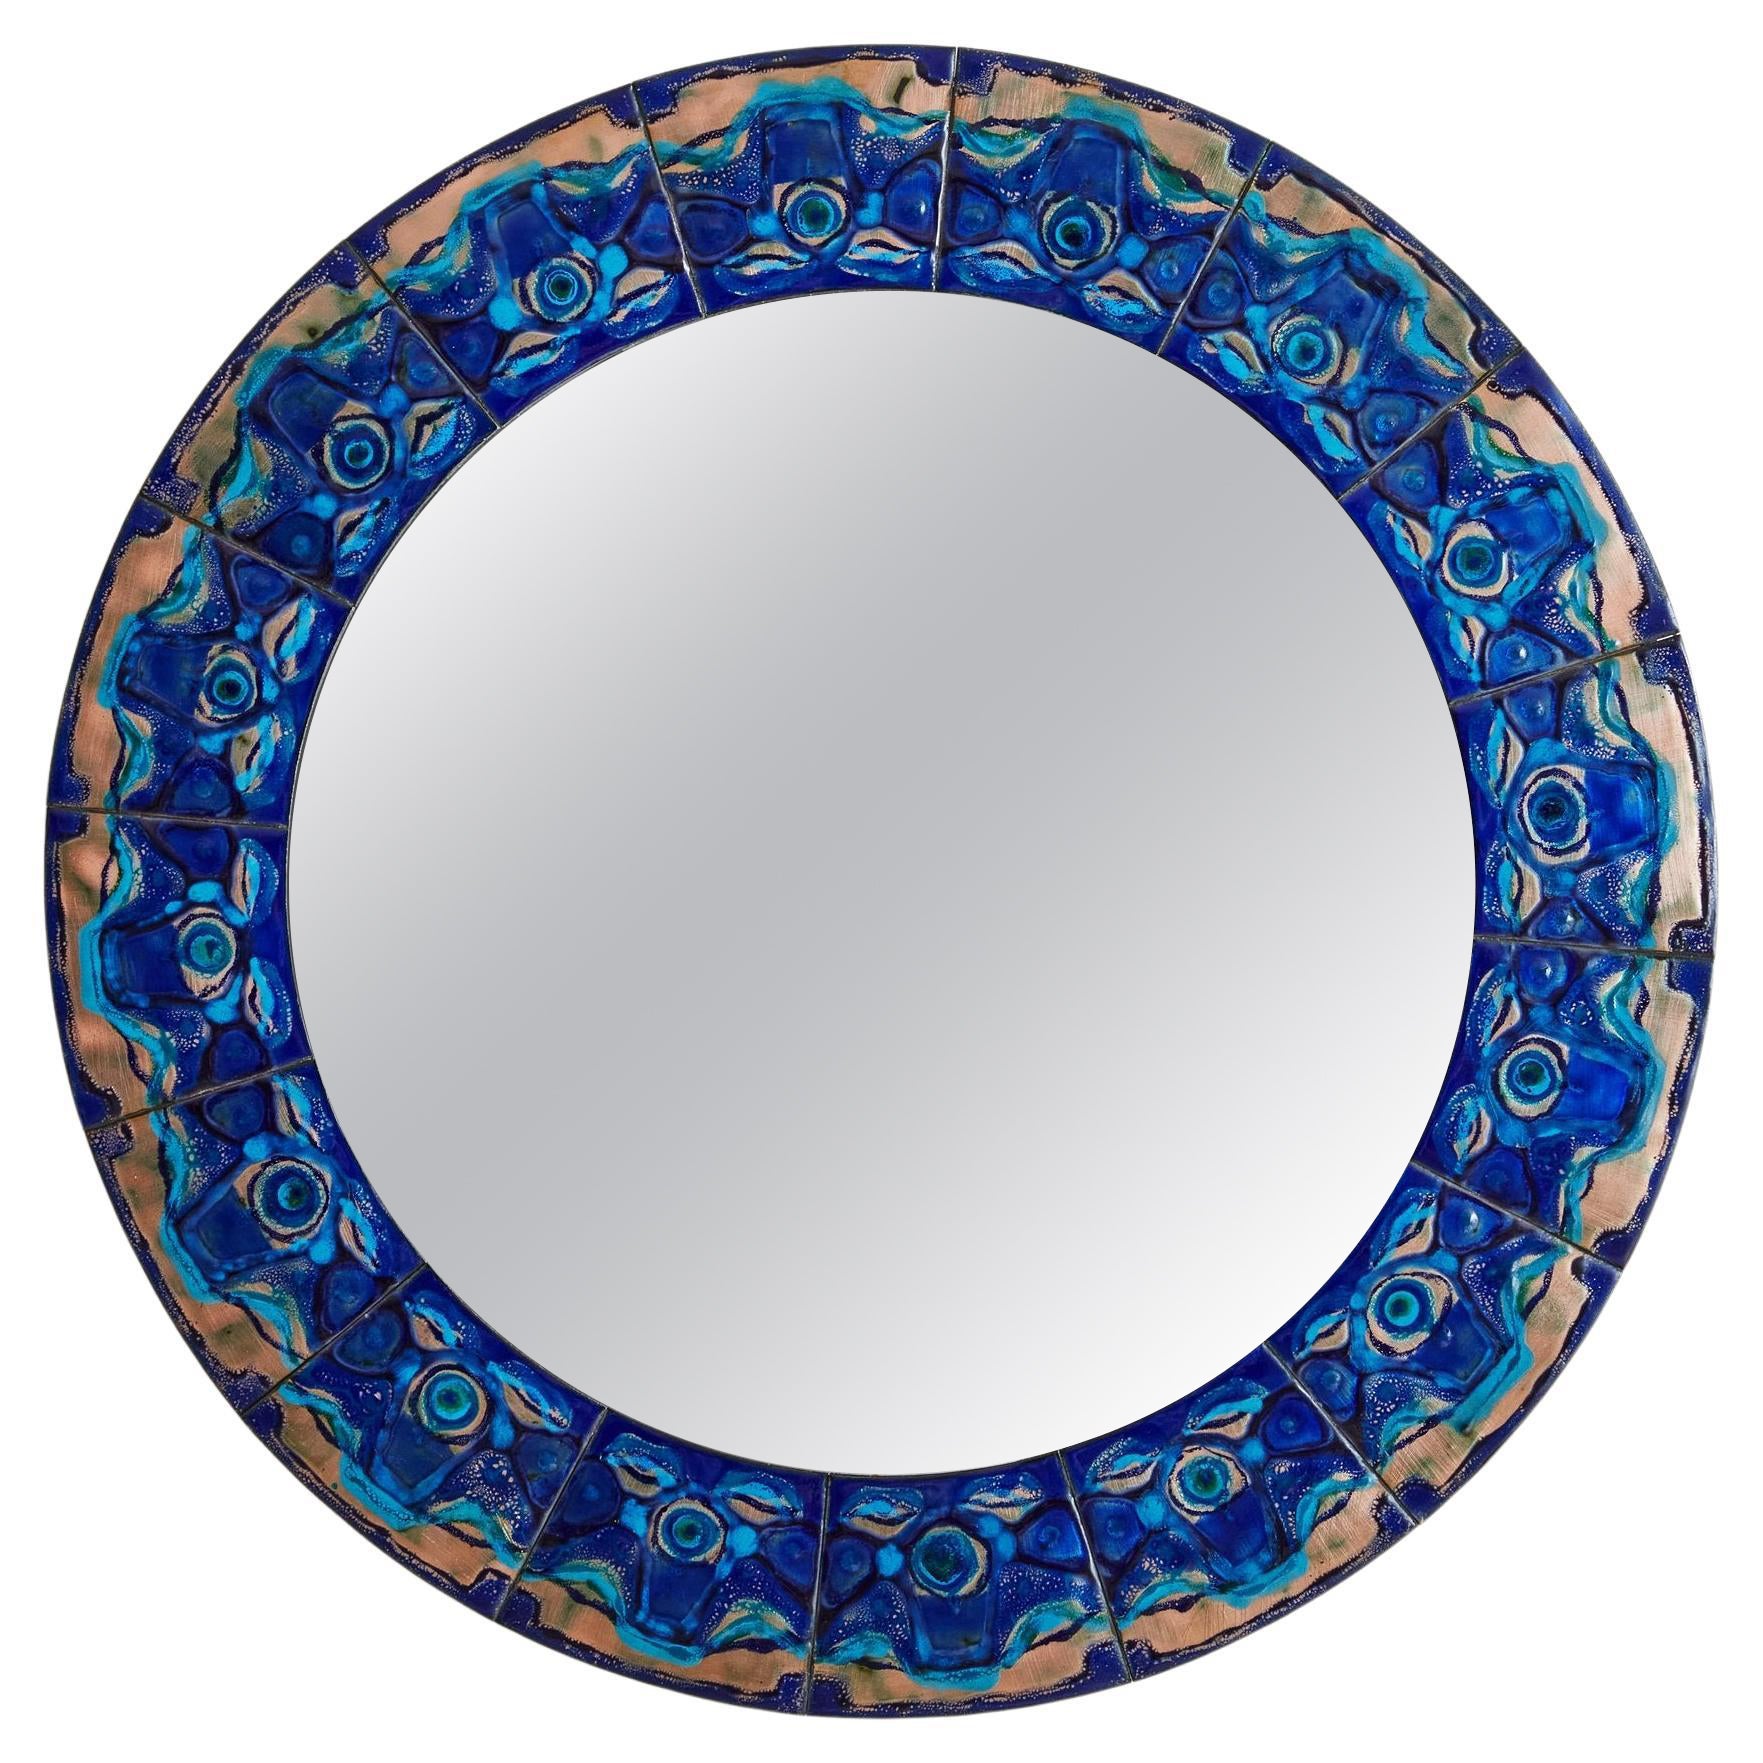 3/5 Blue Hand-Painted Enamel Mirror by Bodil Eje, Denmark 1960s For Sale